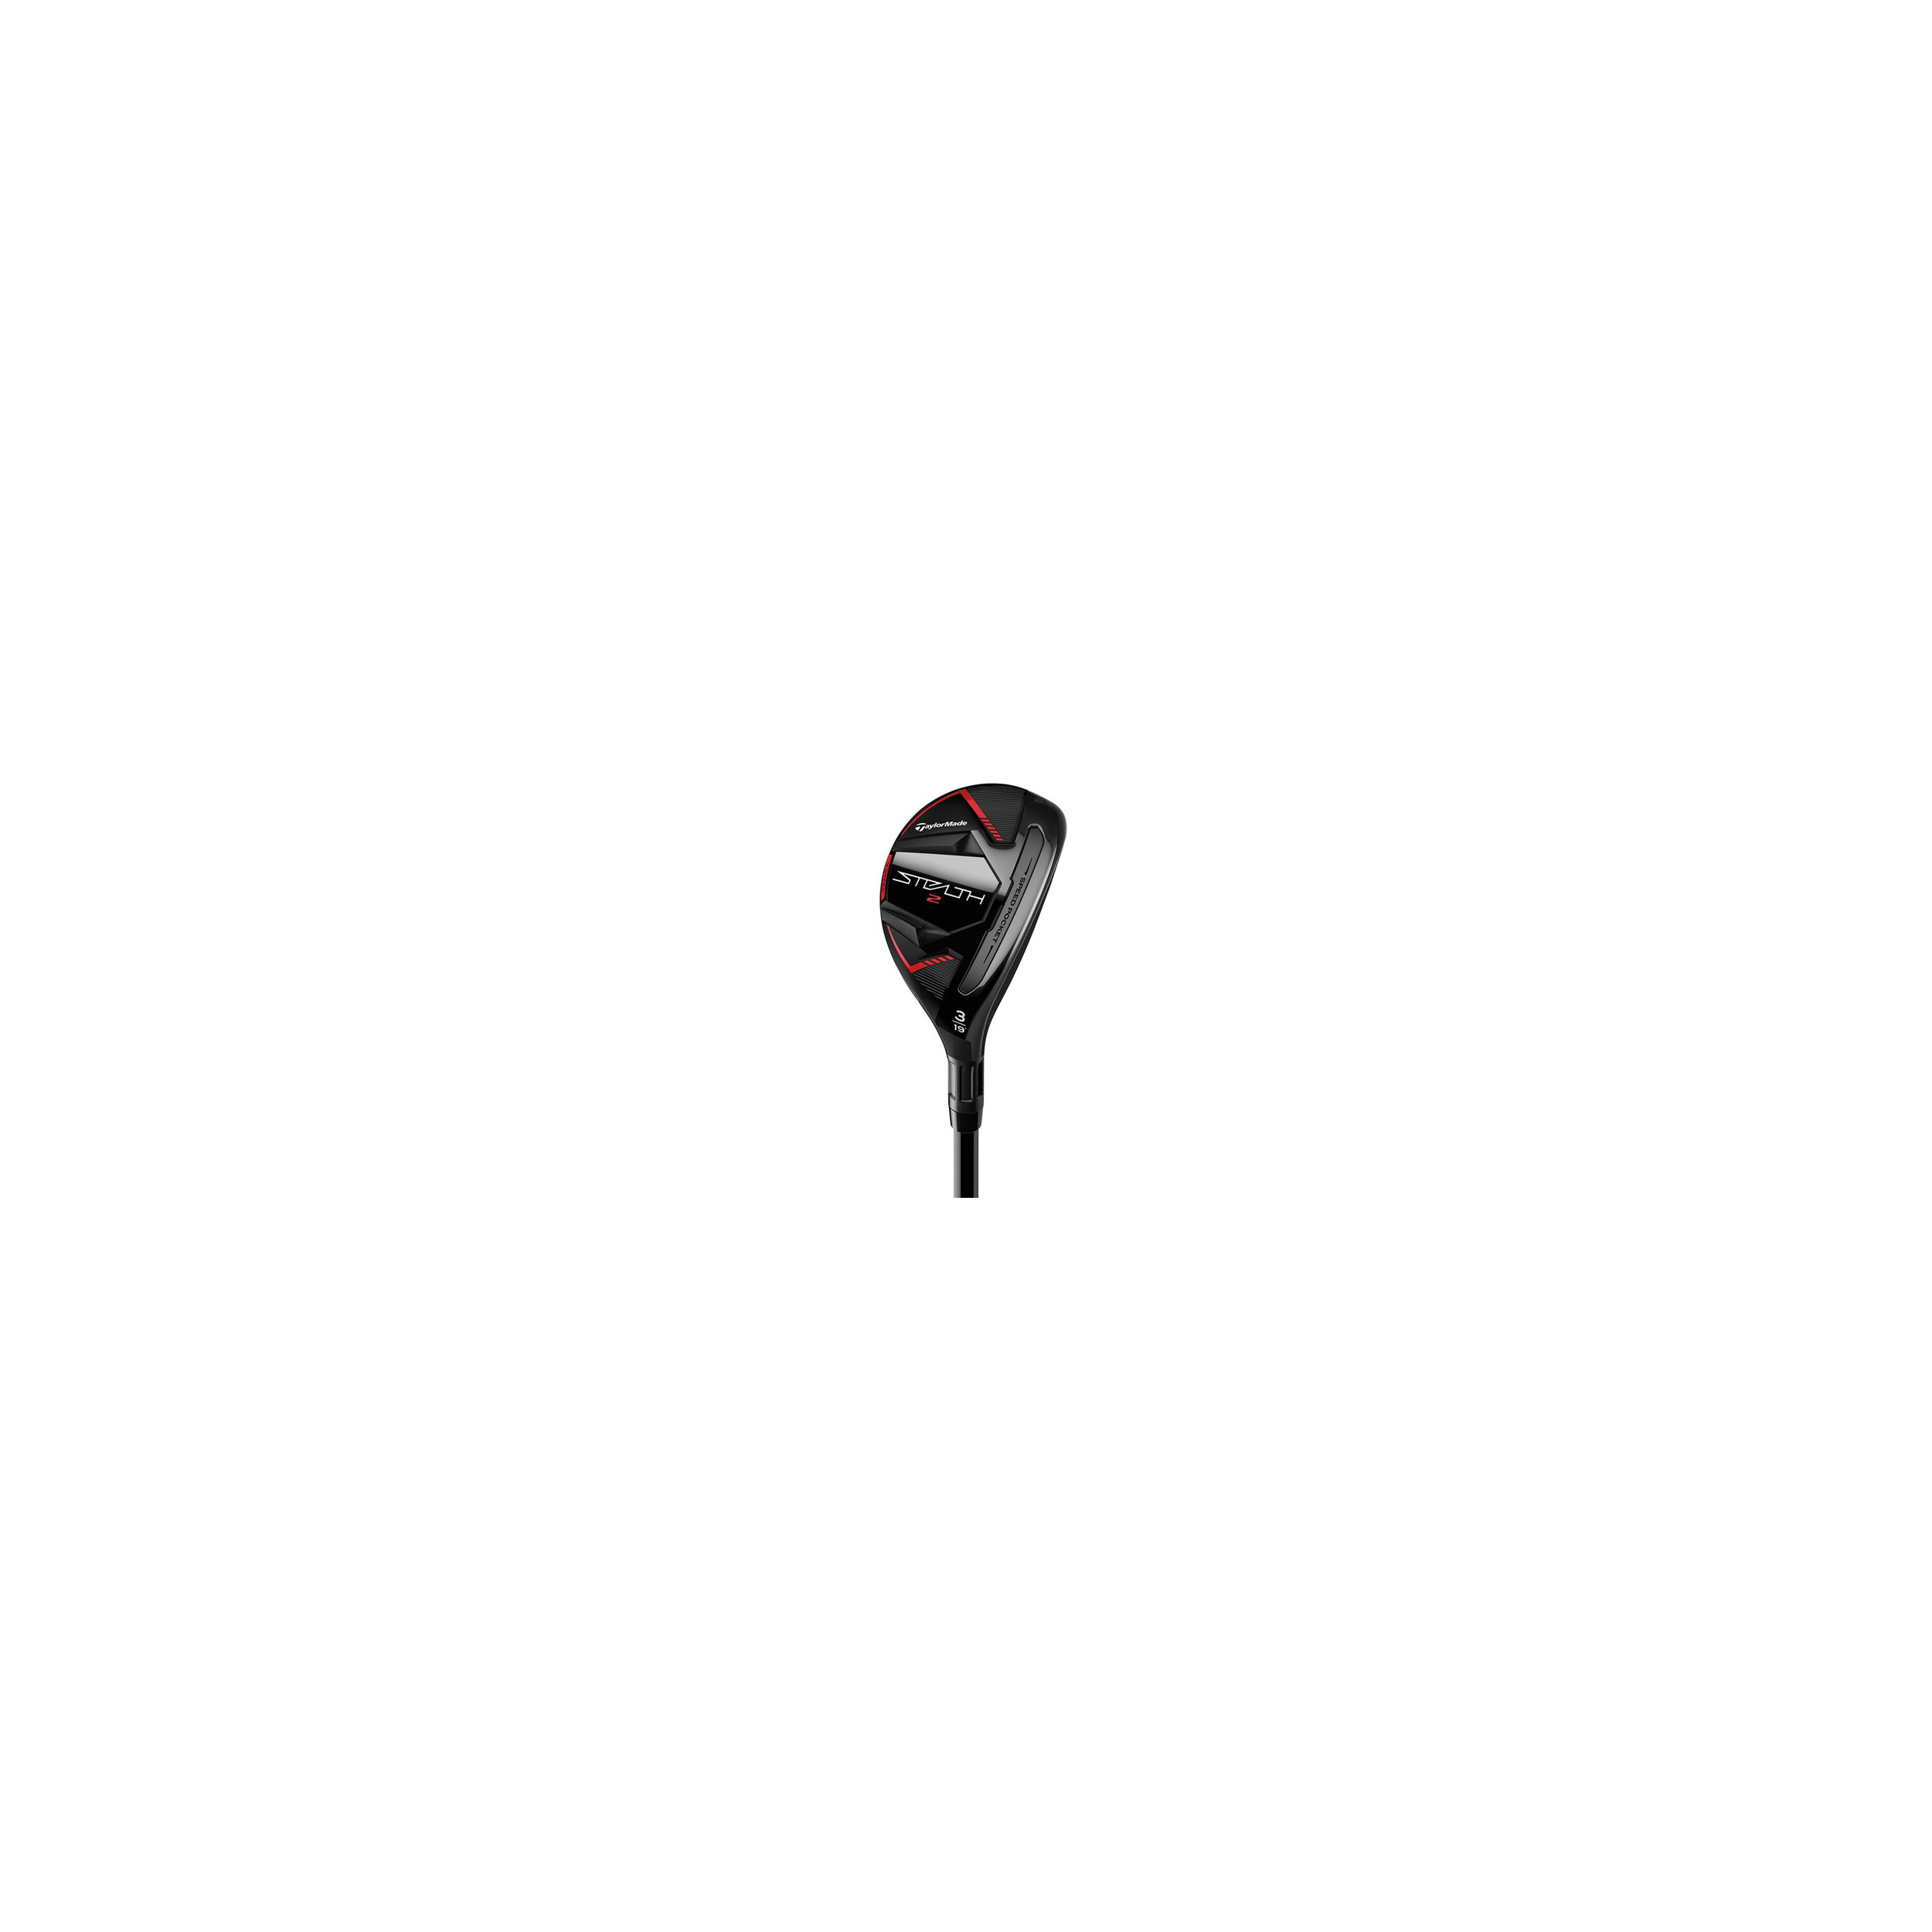 HIBRIDO TAYLORMADE STEALTH 2 3H